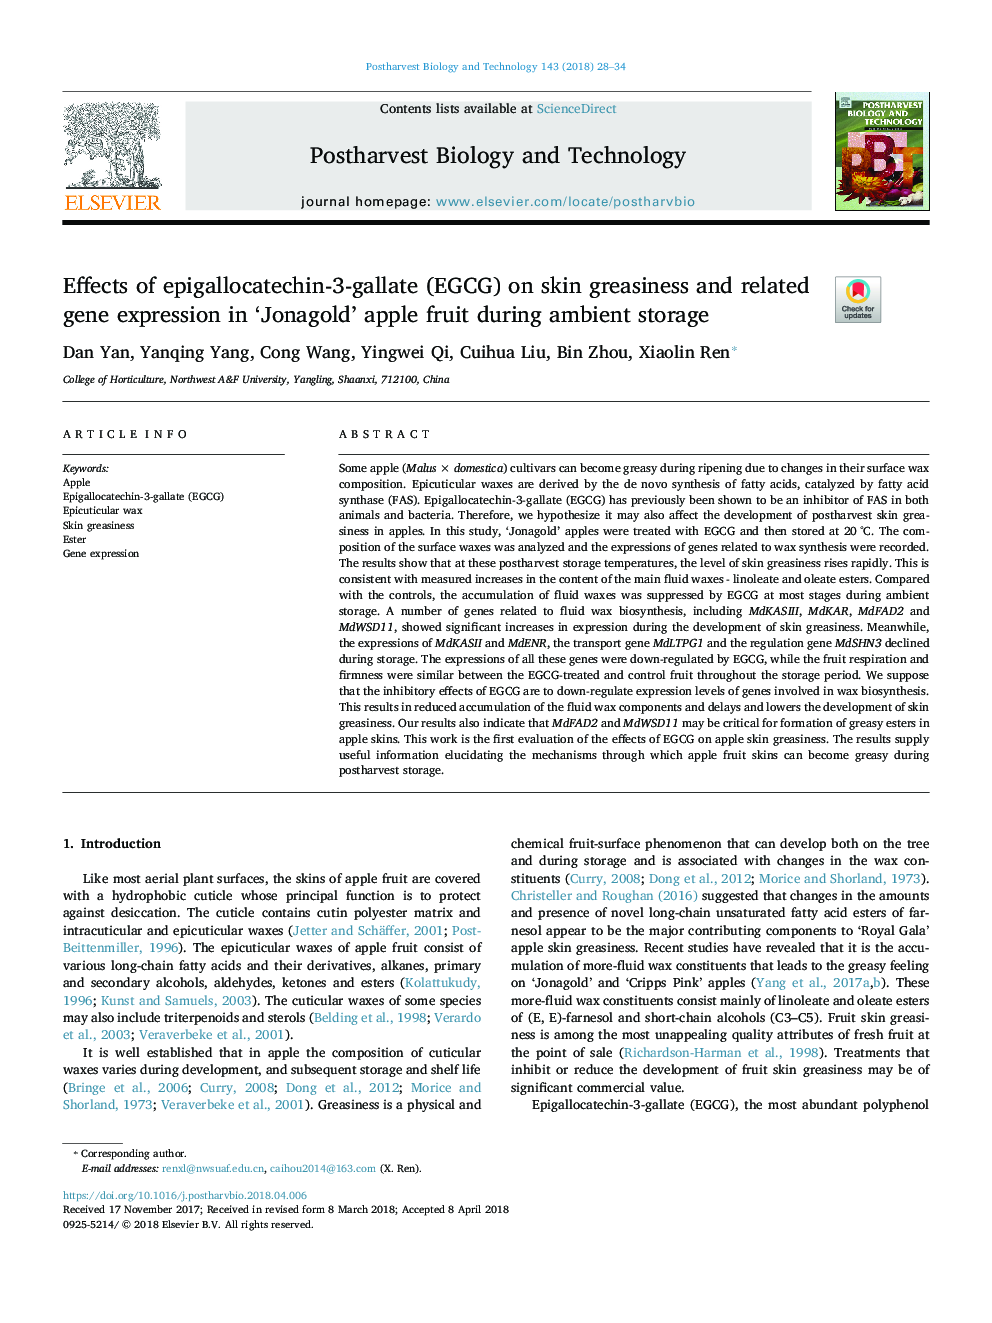 Effects of epigallocatechin-3-gallate (EGCG) on skin greasiness and related gene expression in 'Jonagold' apple fruit during ambient storage